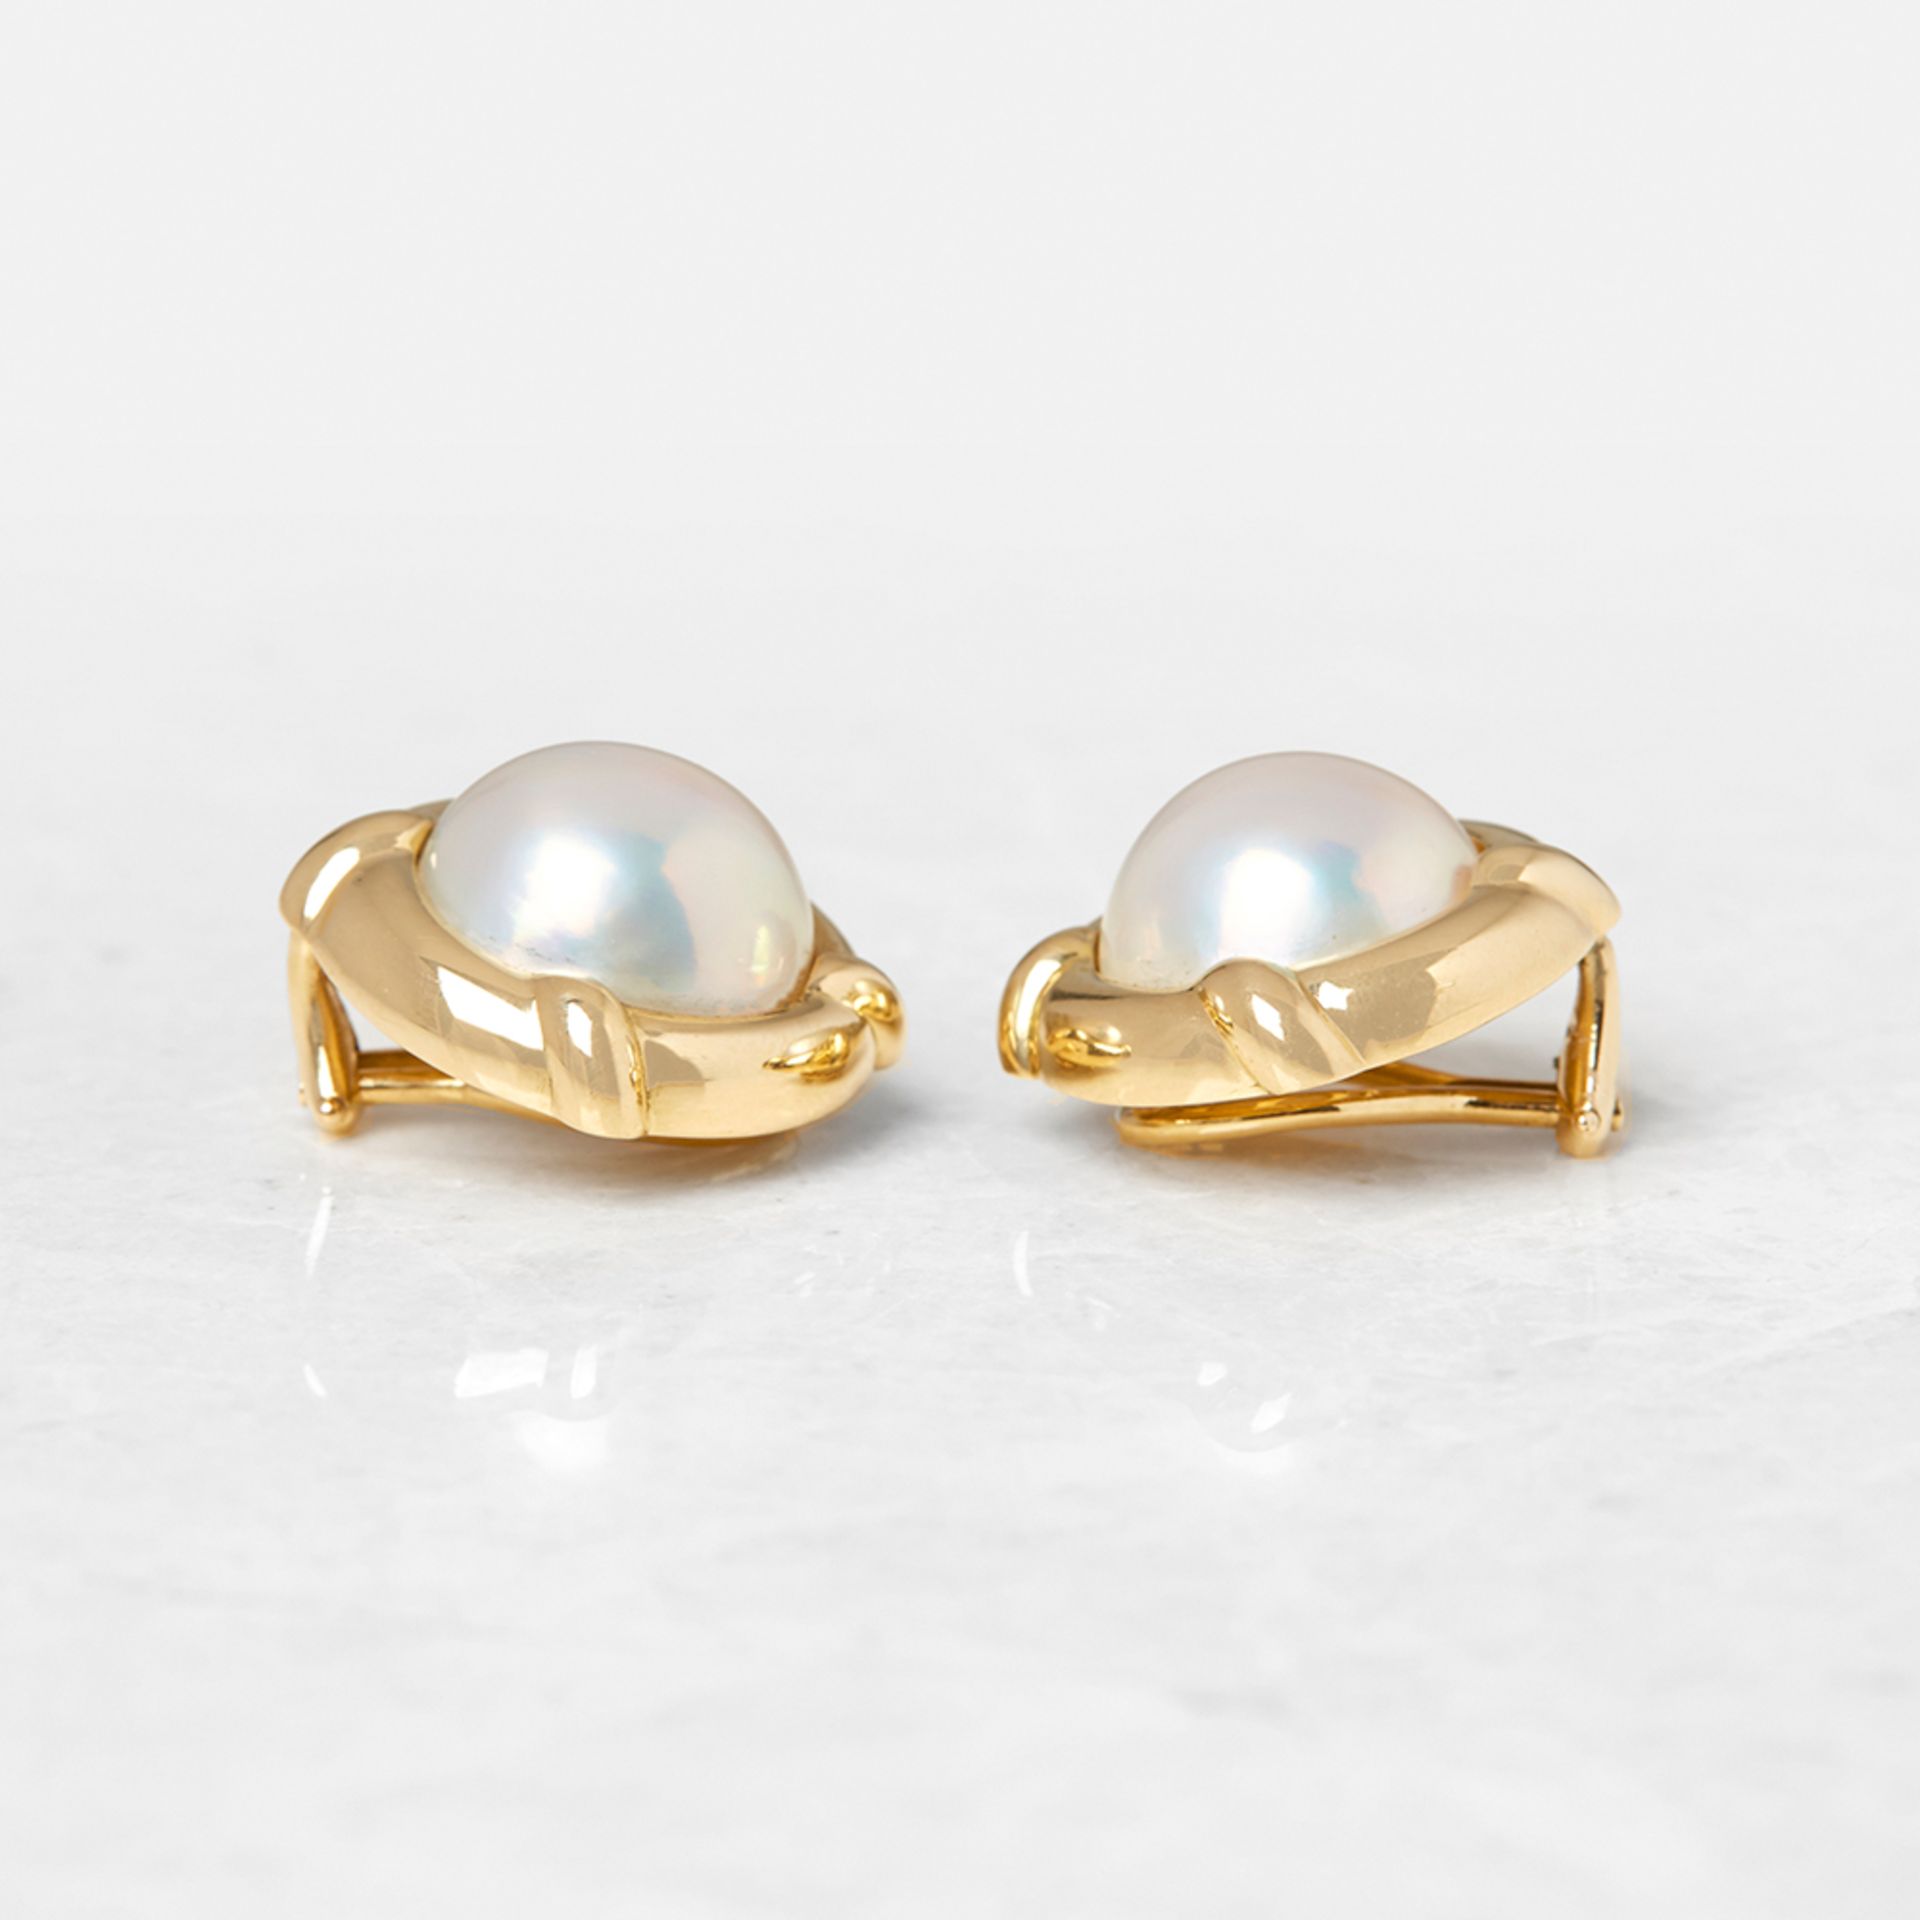 Tiffany & Co. 18k Yellow Gold Mabe Pearl Earrings - Image 4 of 15